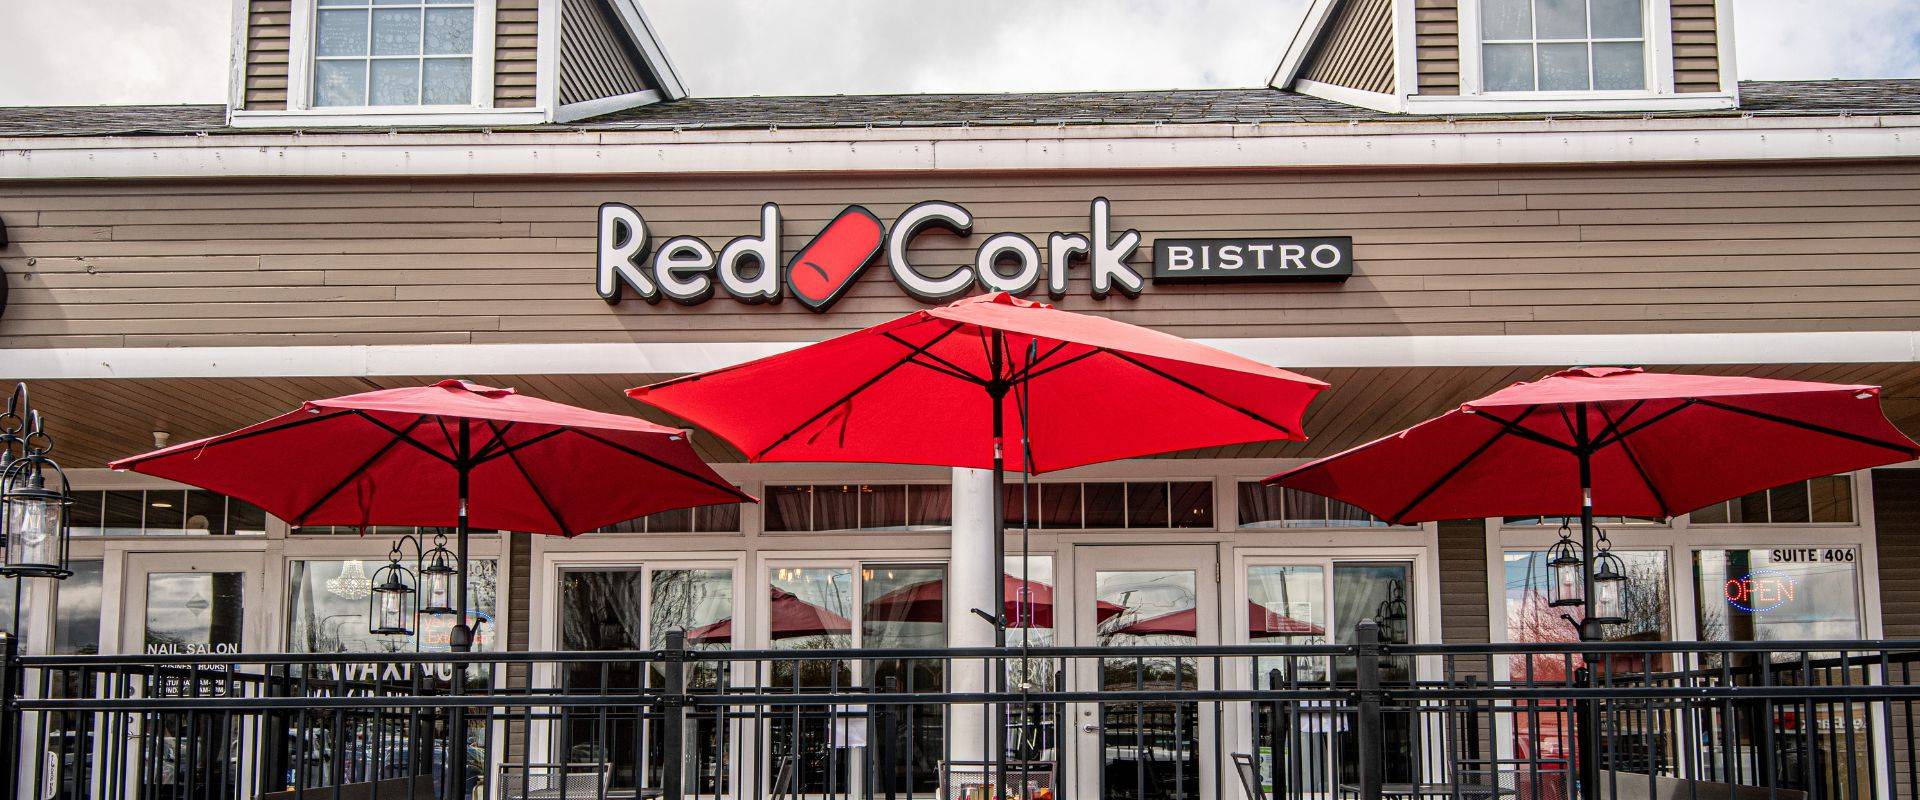 Red Cork Bistro in Mukilteo is located in the Harbor Pointe Shopping Center on Mukilteo Speedway.